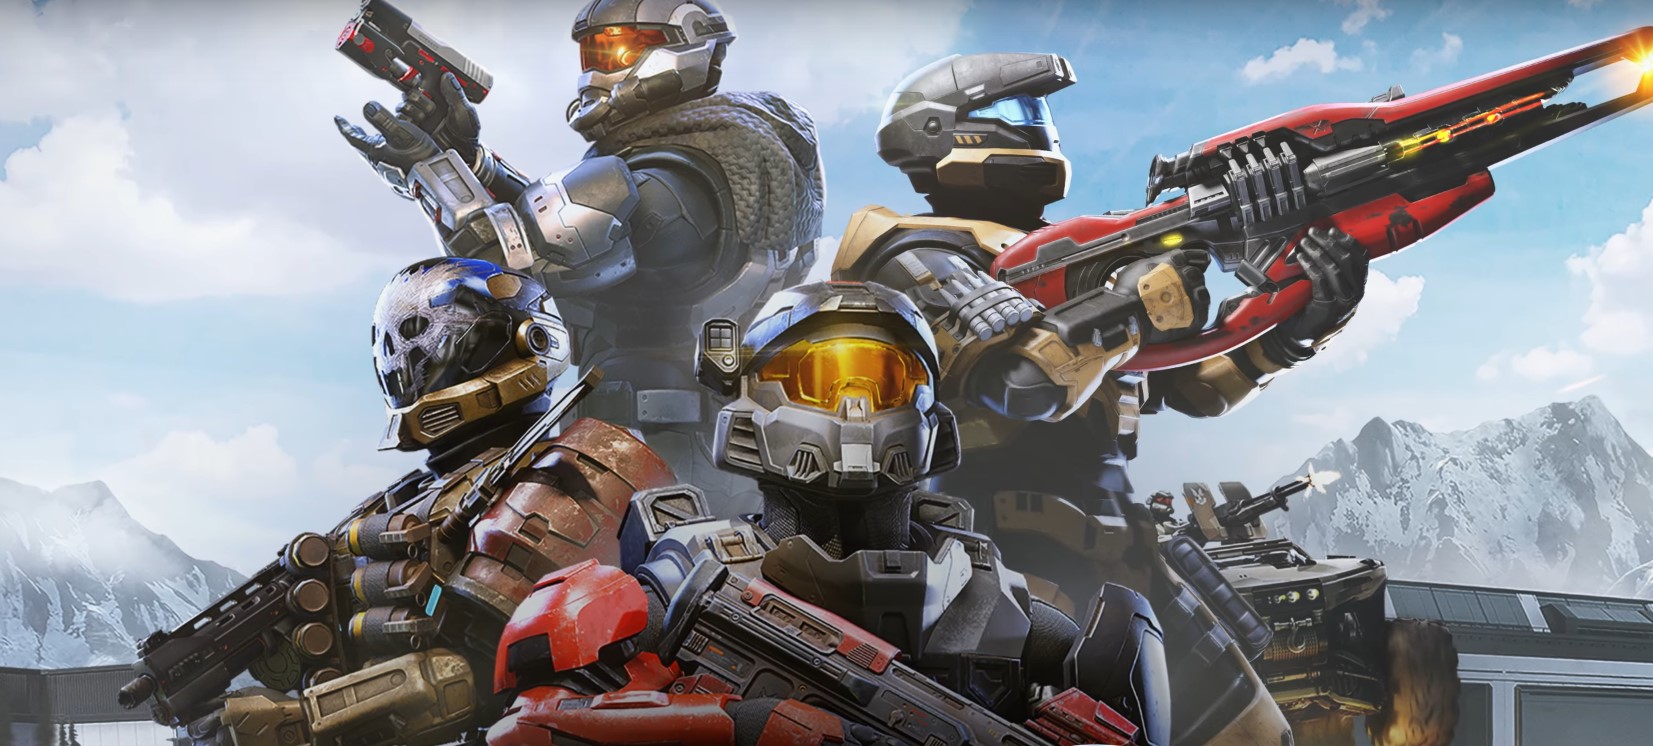  Microsoft says it has metaverse plans for Halo, Minecraft, and other games 